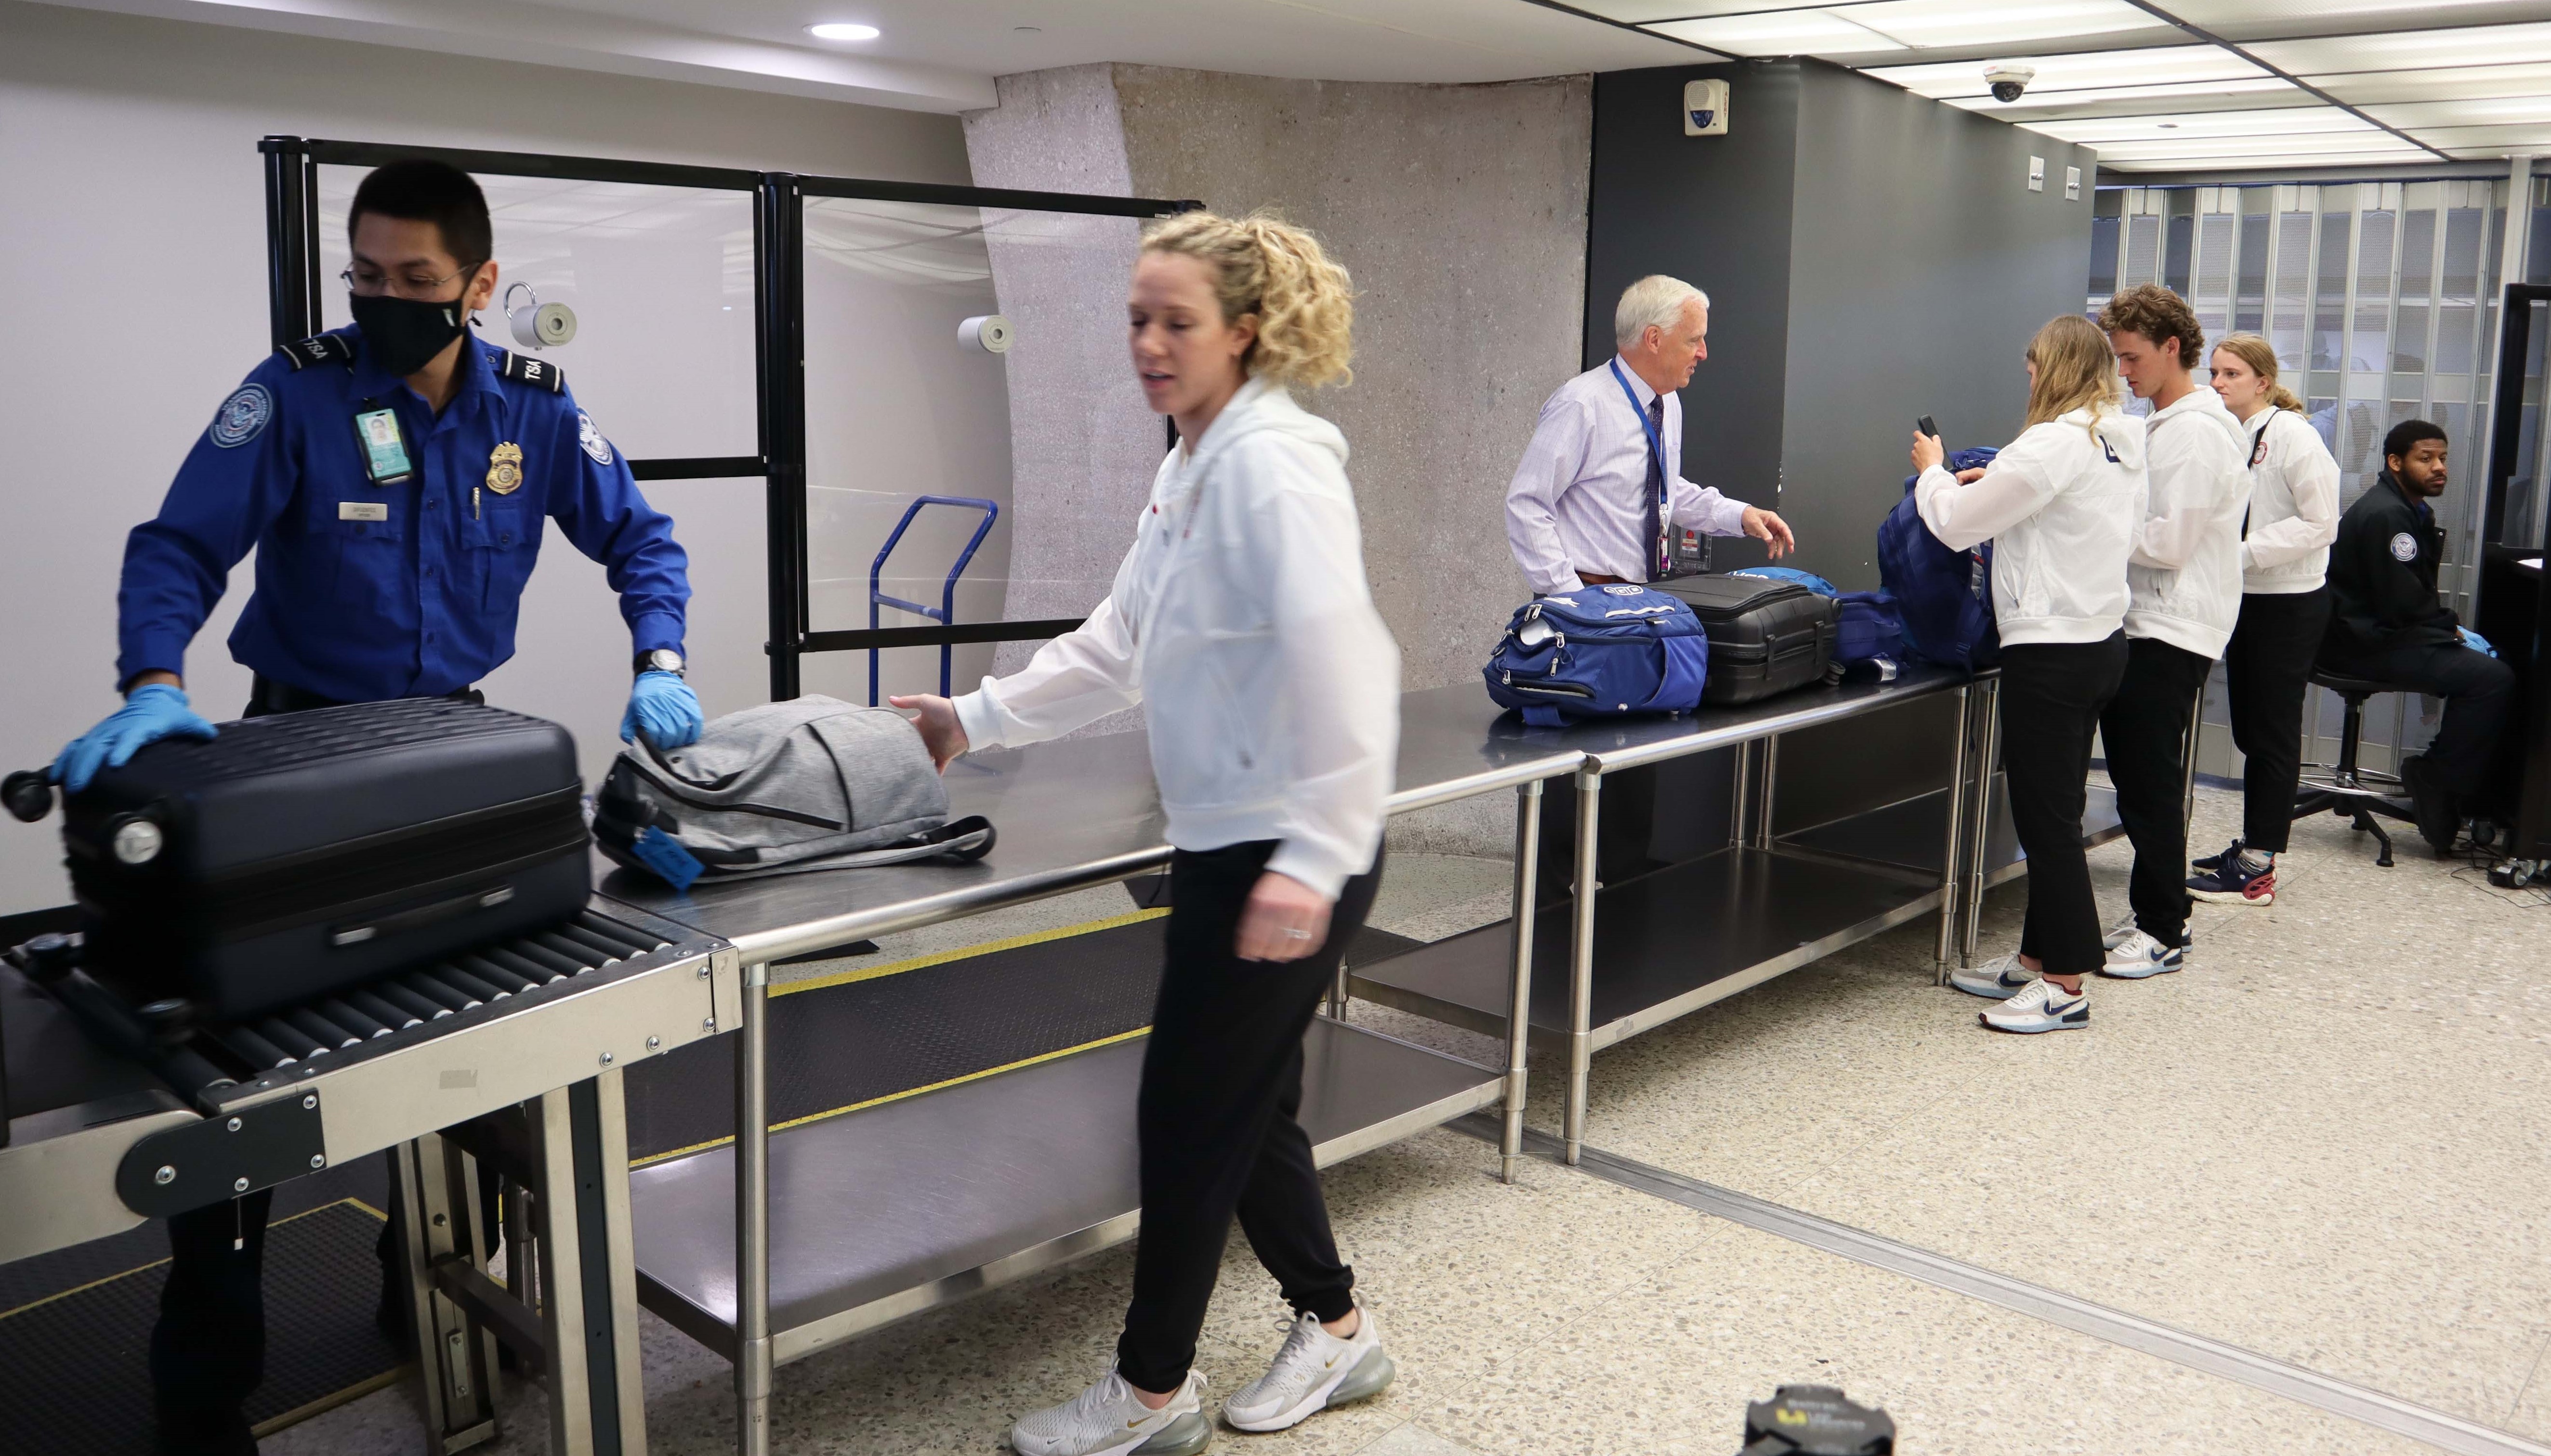 TSA Officer Luciano Sifuentes screens a U.S. Olympian at a Washington Dulles International Airport checkpoint. Dulles Federal Security Director Scott T. Johnson (white shirt, tie) engages with several Olympians preparing their carry-on bags for X-ray screening. (Photo by Sena Park)